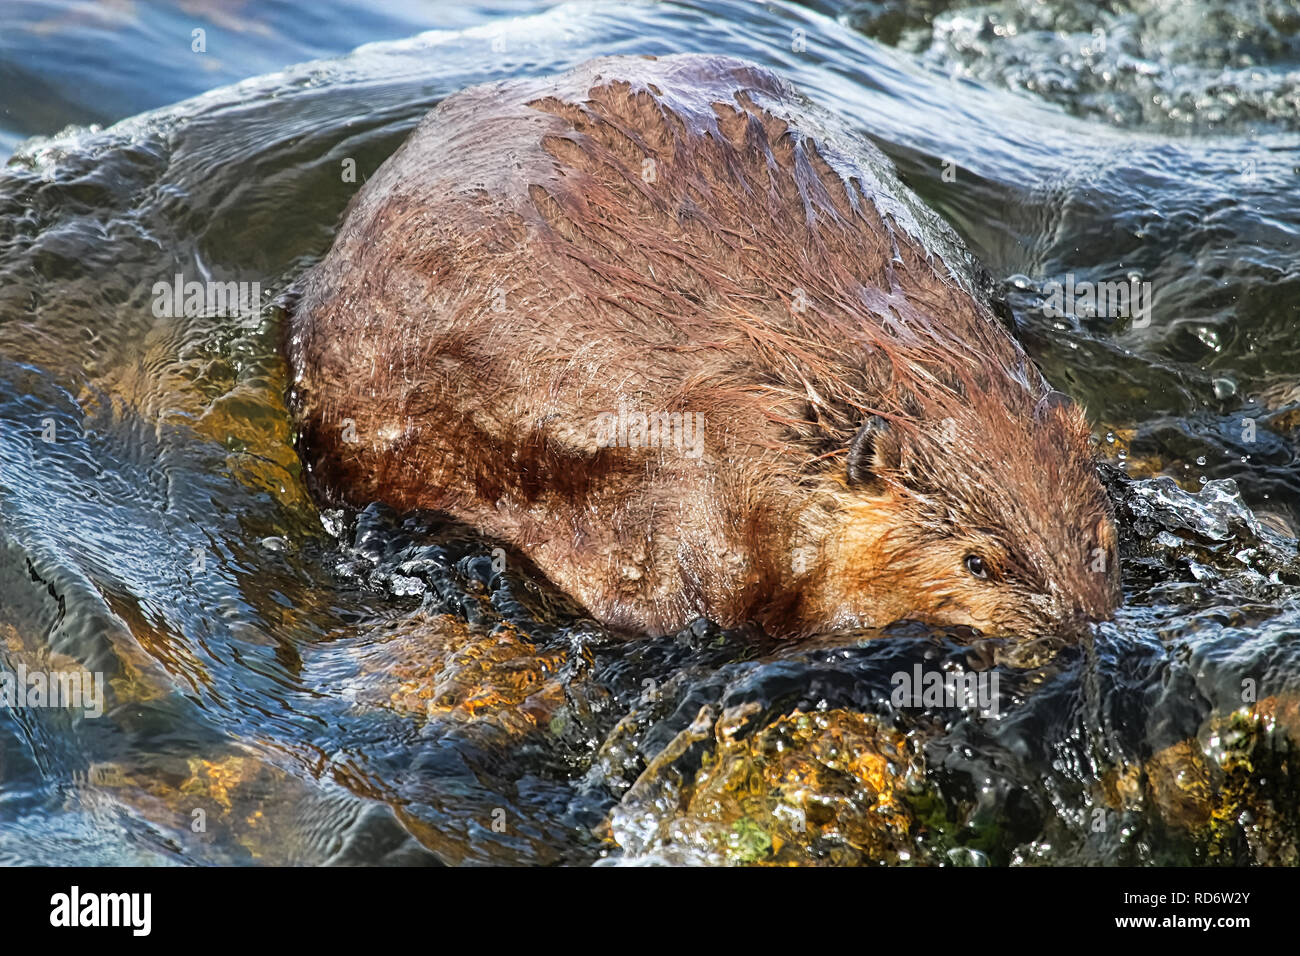 A beaver partically submerged in water. Stock Photo